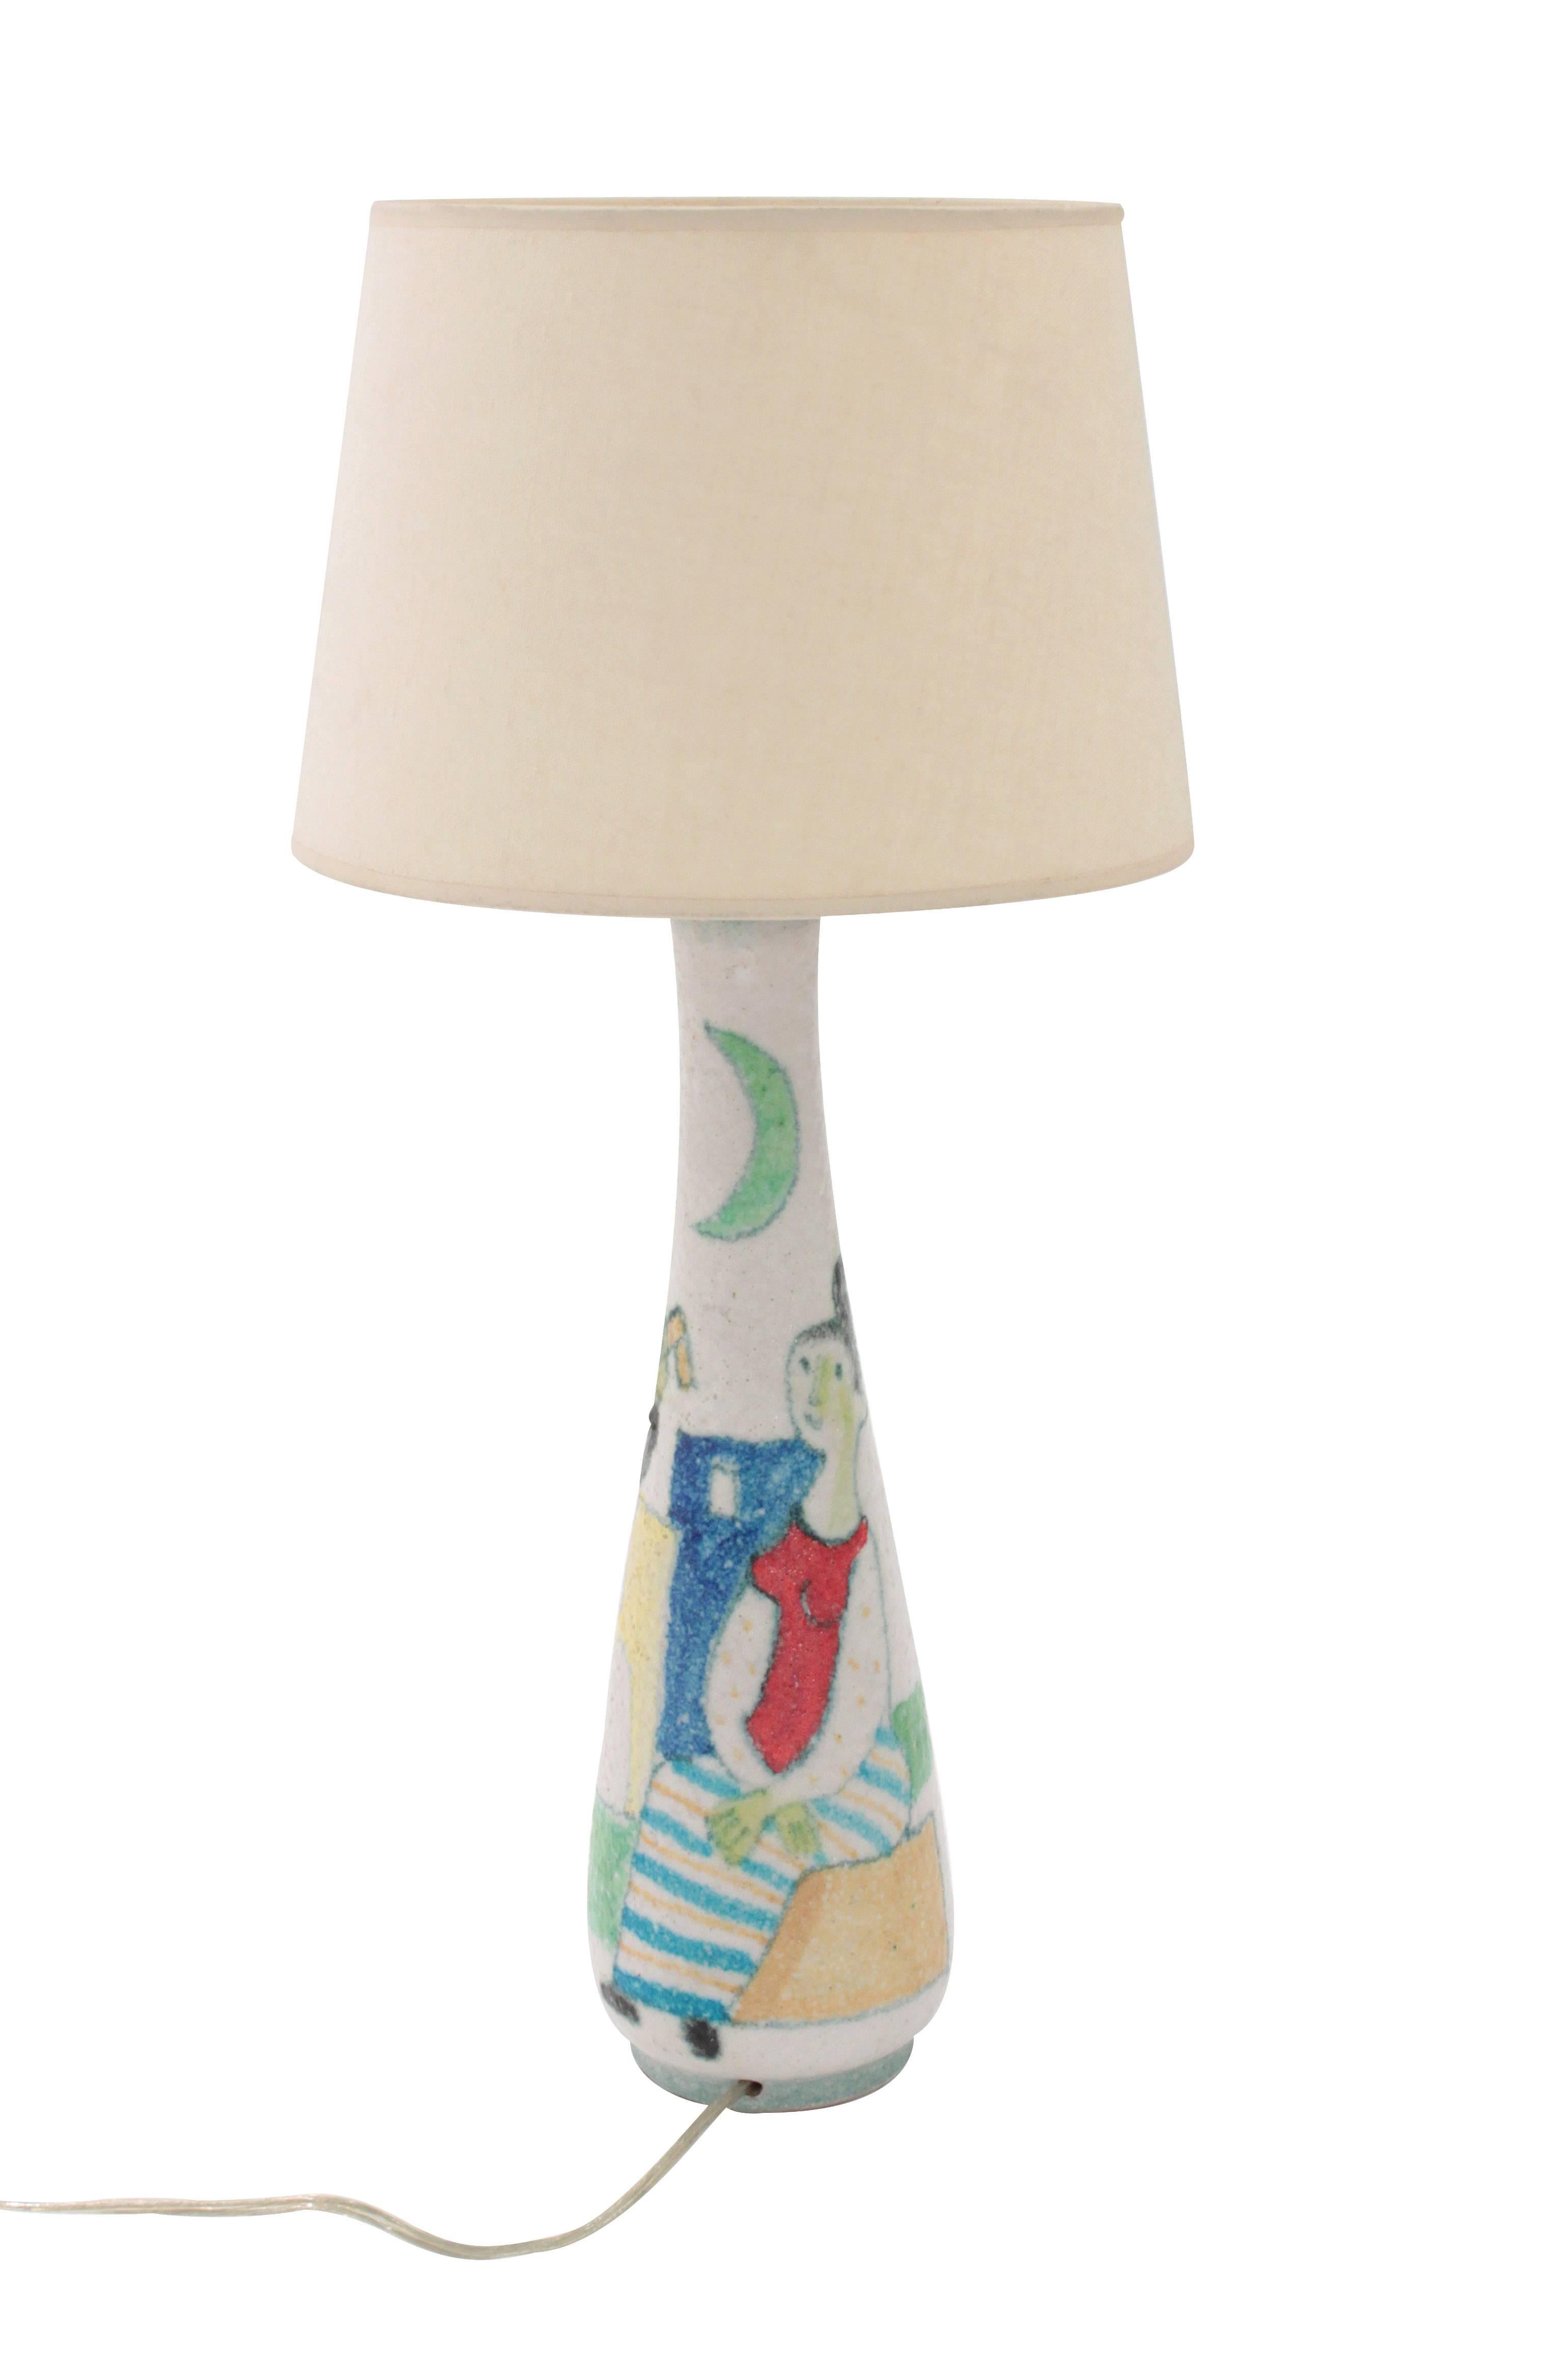 Studio made ceramic table lamp with colorful figural decoration by Guido Gambone, Italy, 1950s (signed 